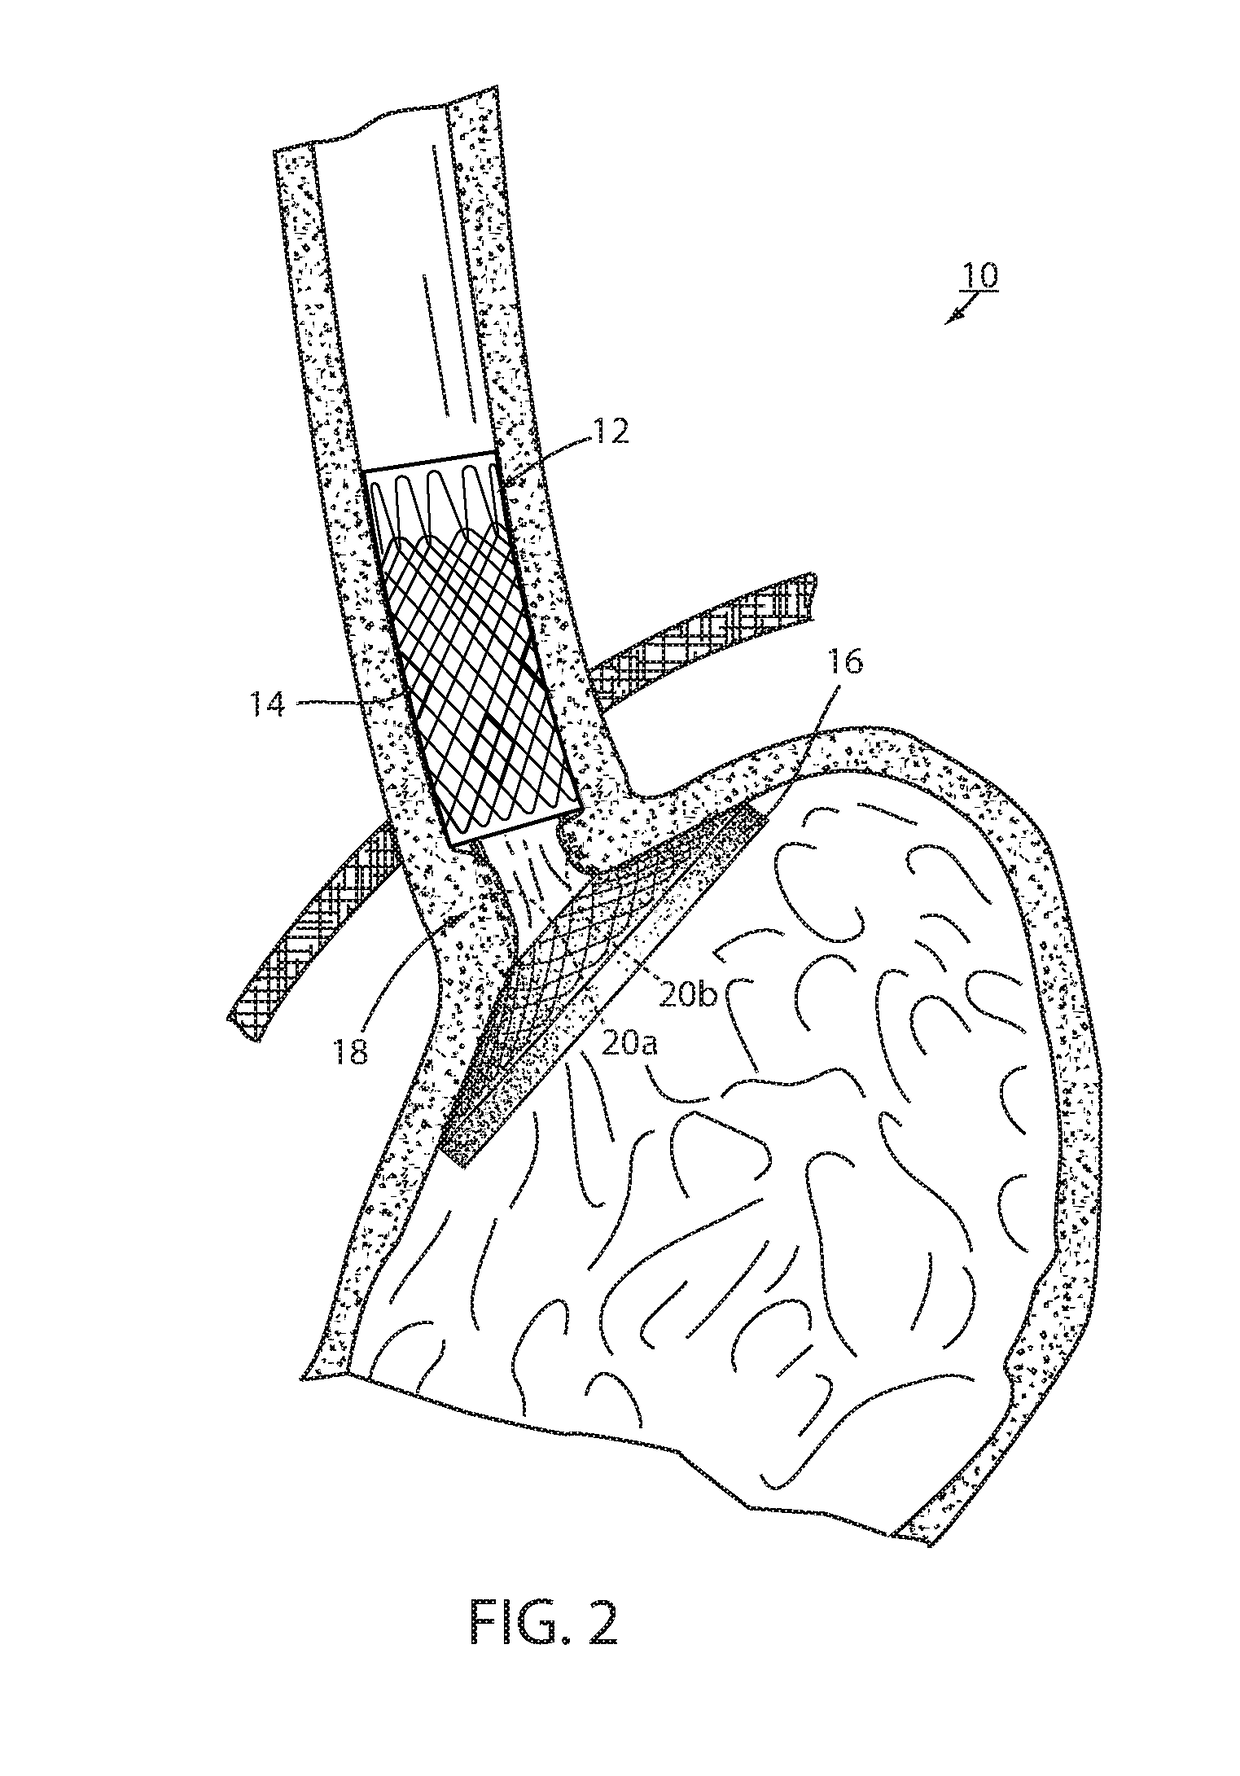 Fixation of intraluminal device